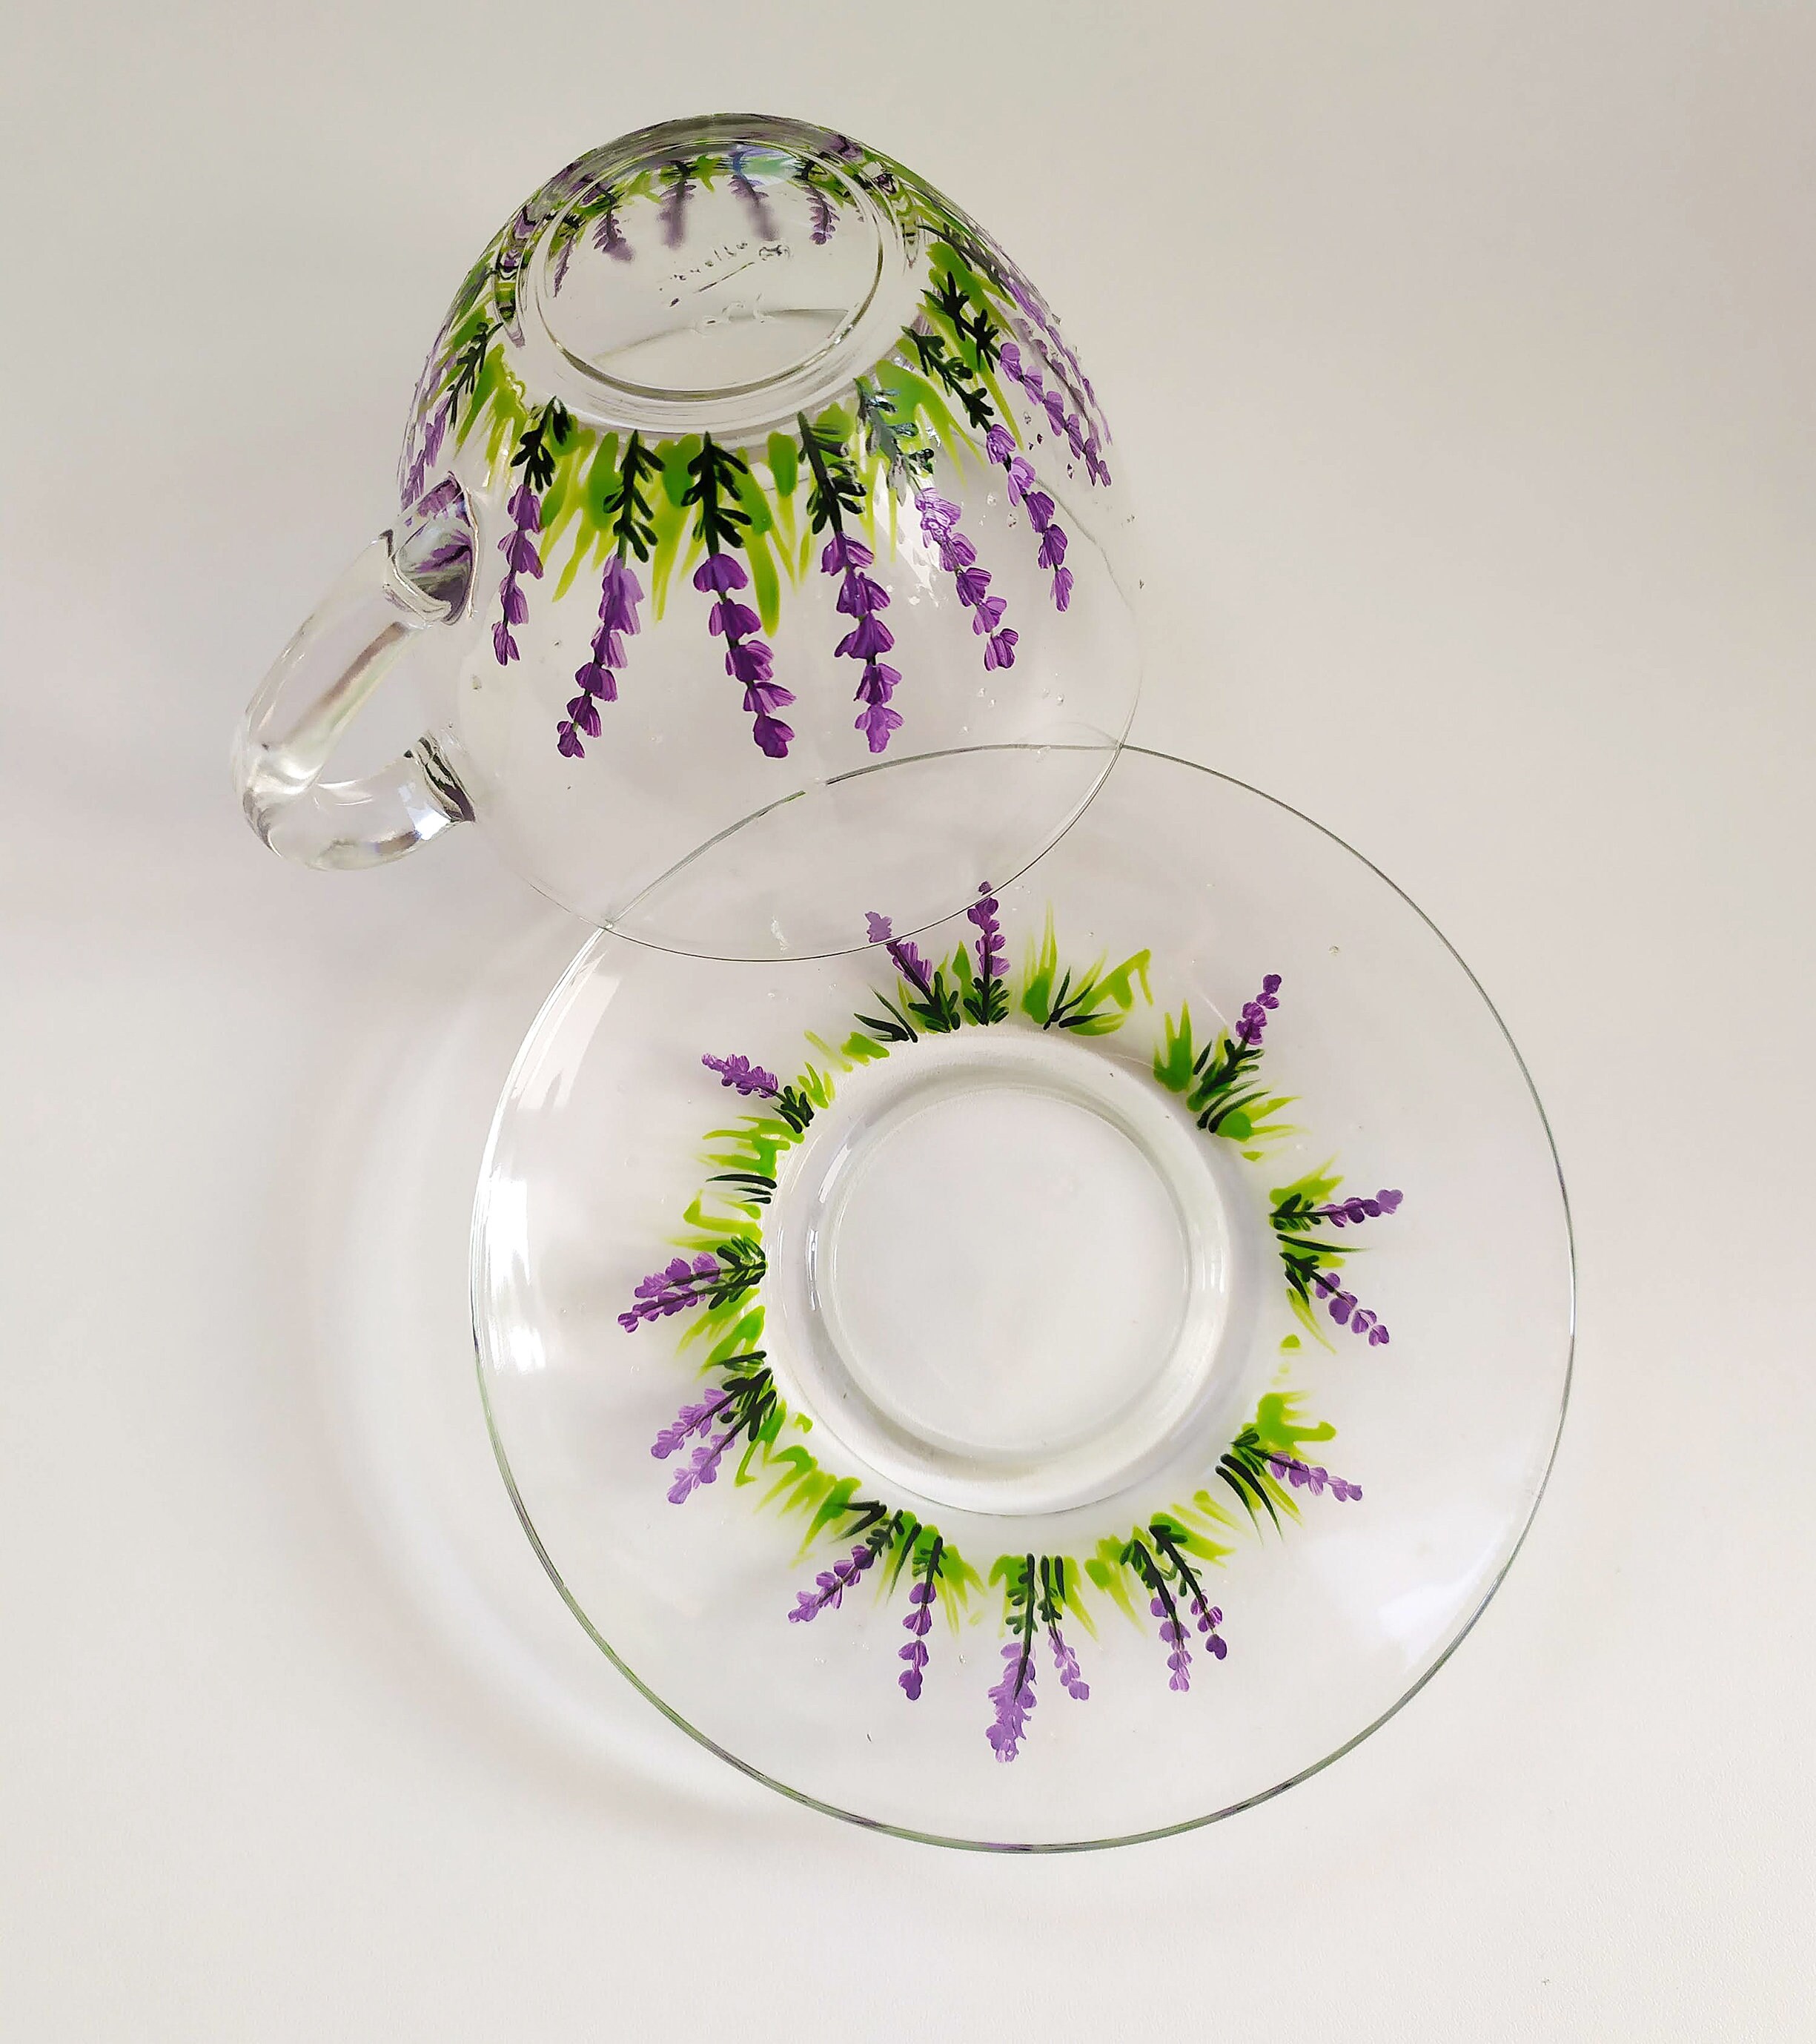 Lavender Tea Cup & Saucer Set, Flower Hand Painted Glass Cup Gift for Her,  Provence Home Decor and Tableware 